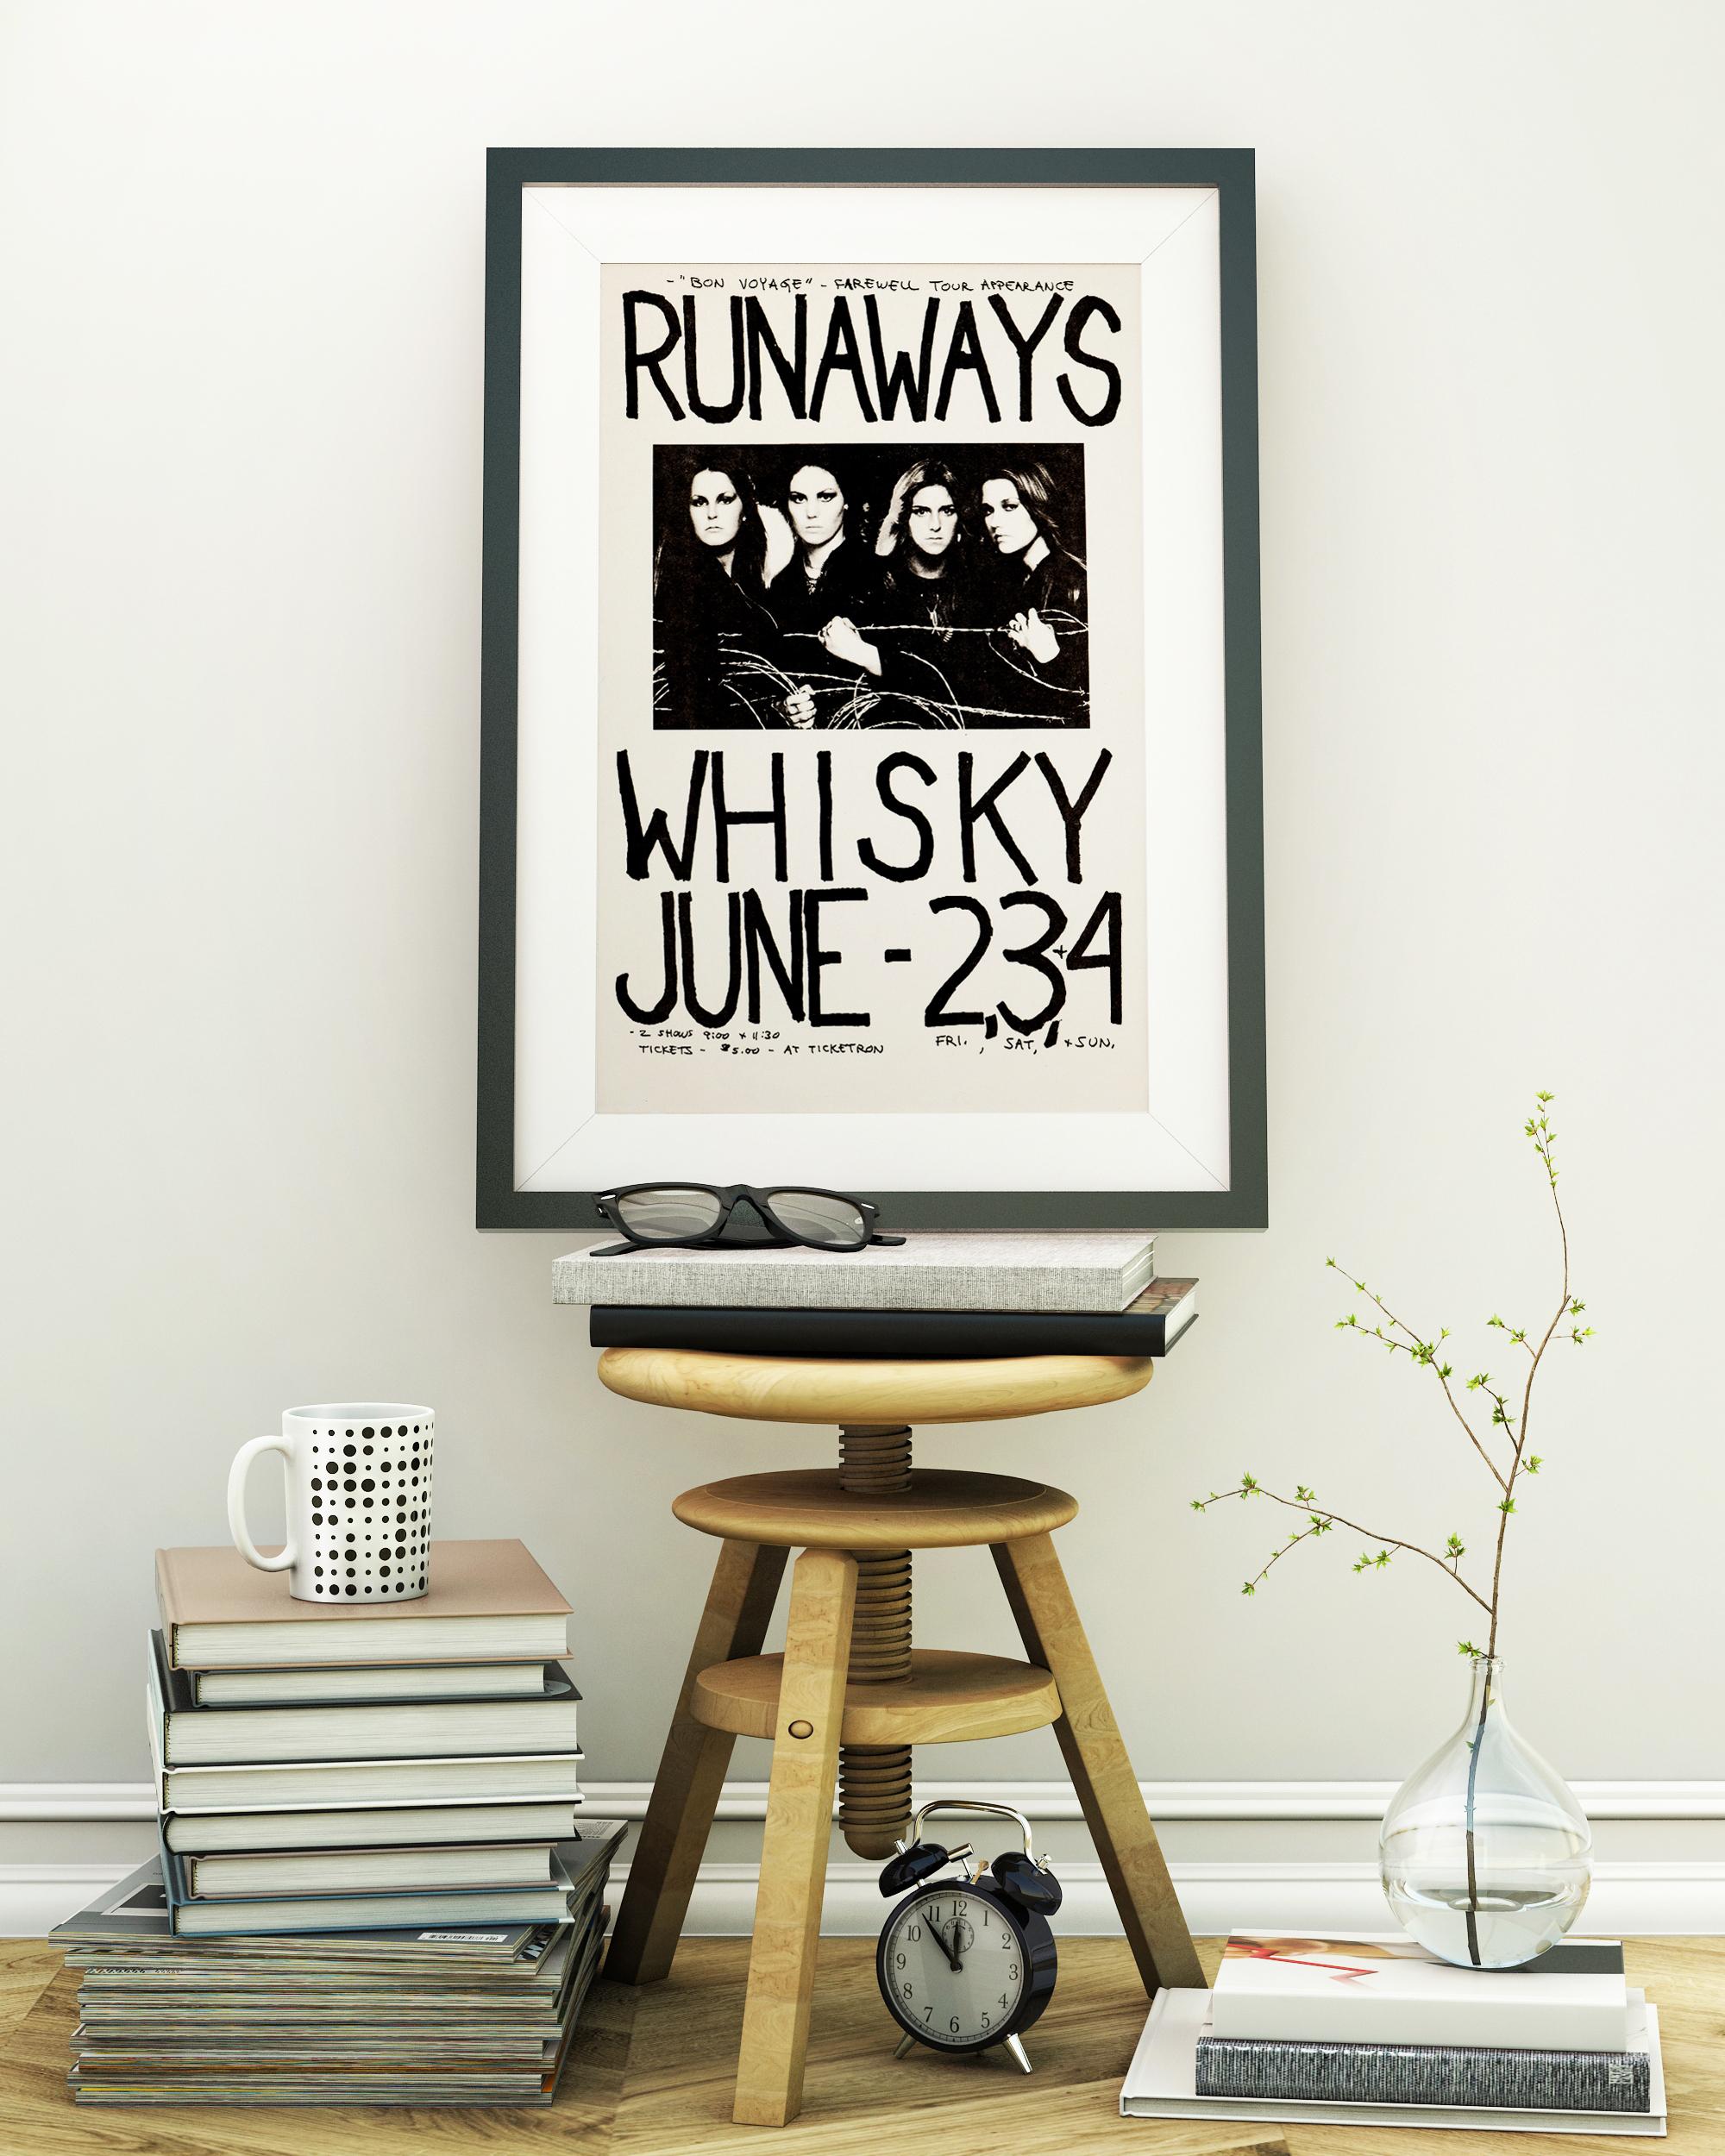 the runaways band poster